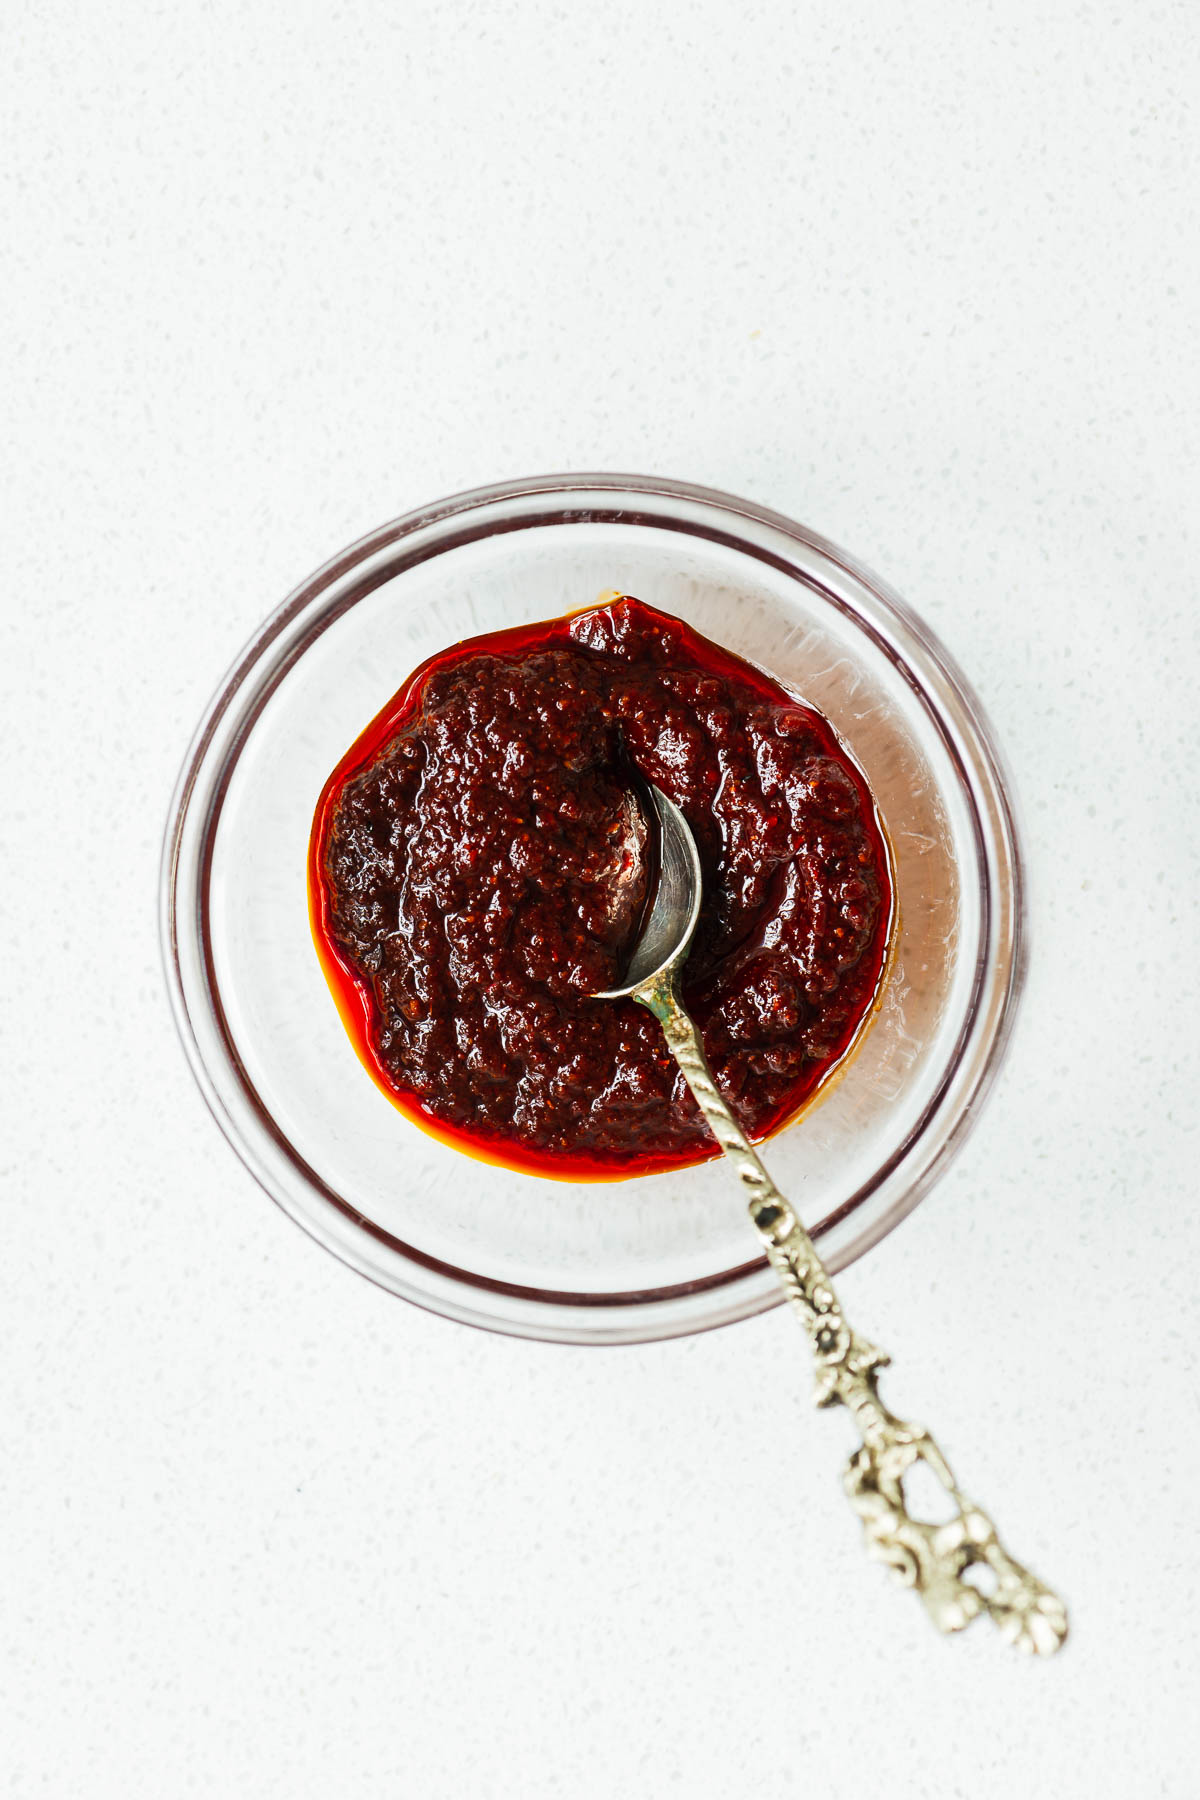 Harissa paste mixed from harissa powder, olive oil, water, lemon juice and tomato paste in a small bowl. It is a thick and glossy paste.